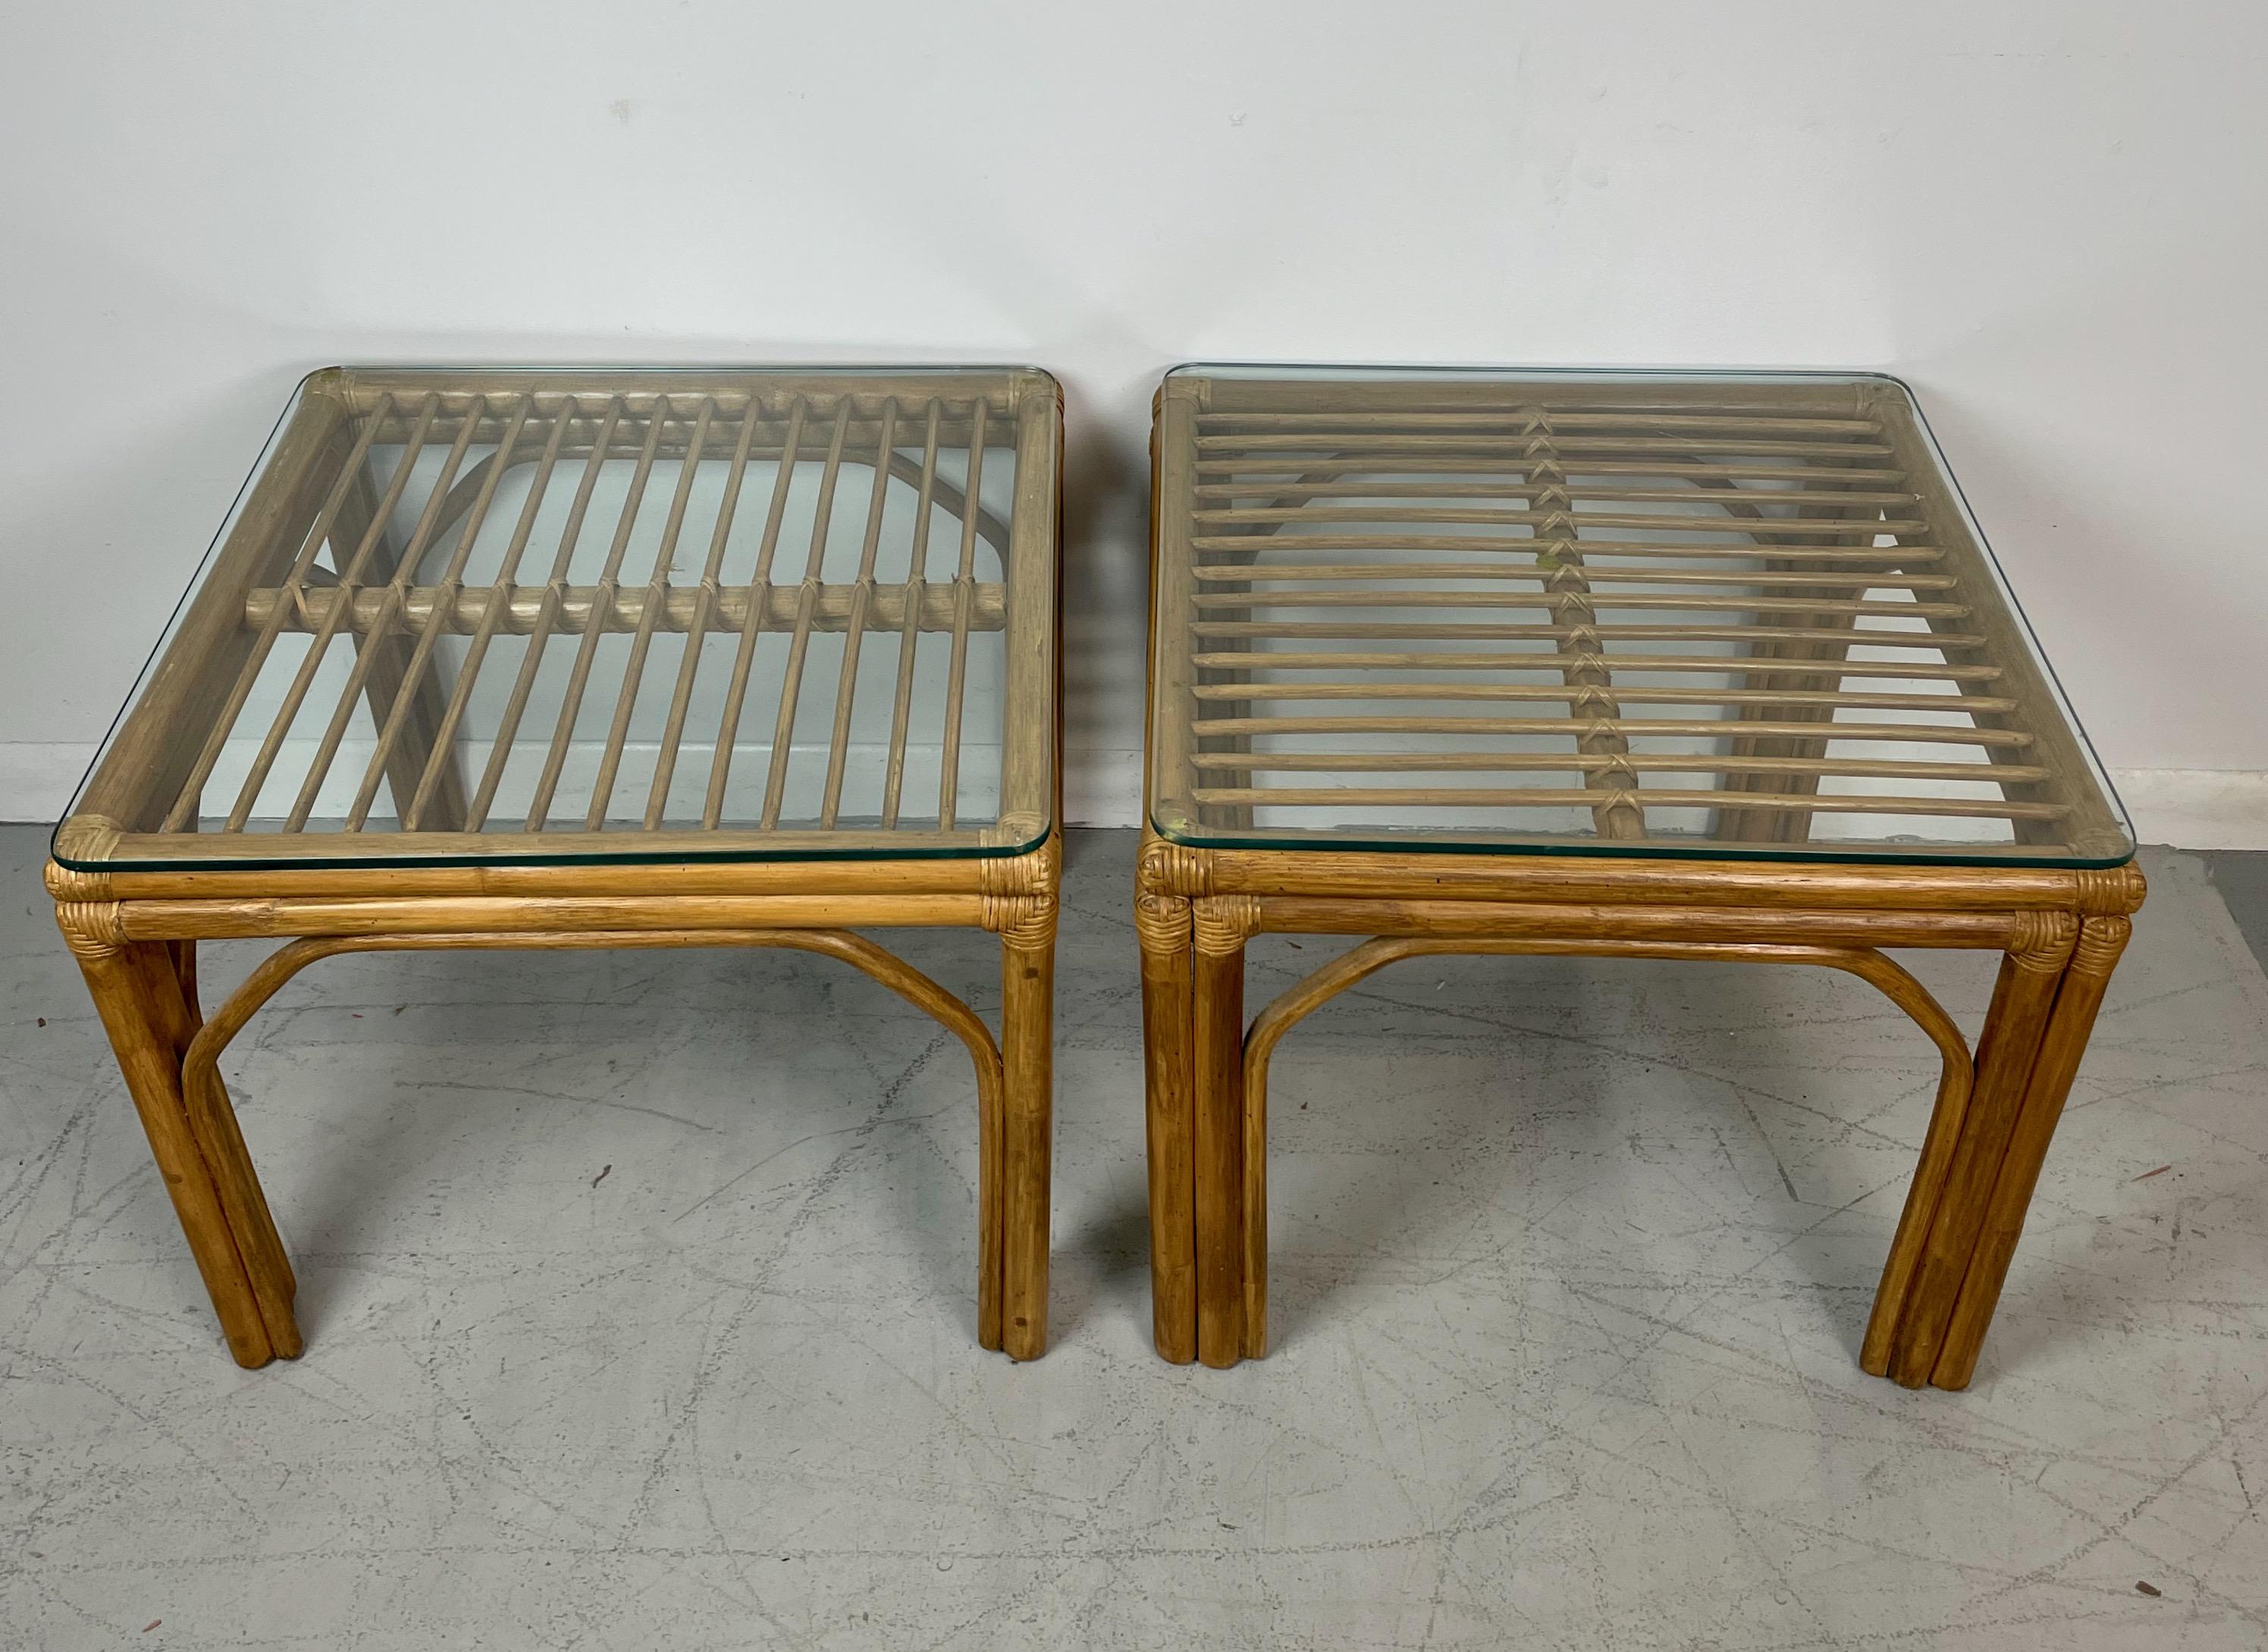 Pair of very versatile bamboo side tables that will work in a number of rooms and situations. These tables can be paired with many different styles and decors.